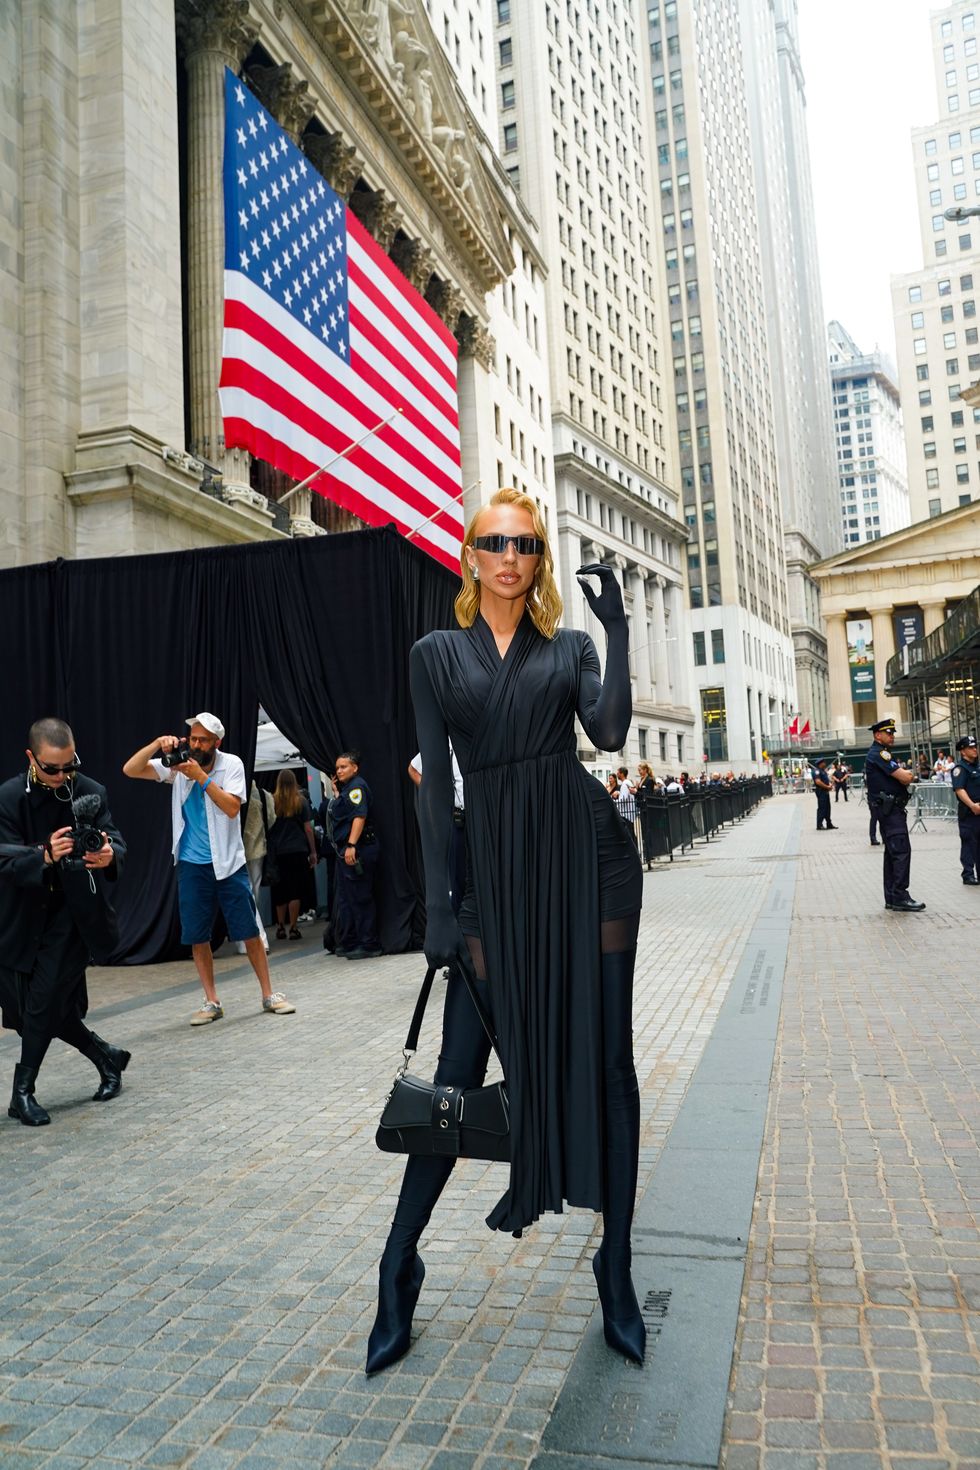 new york, new york may 22 christine quinn attends balenciaga spring 2023 at the new york stock exchange on may 22, 2022 in new york city photo by sean zannipatrick mcmullan via getty images